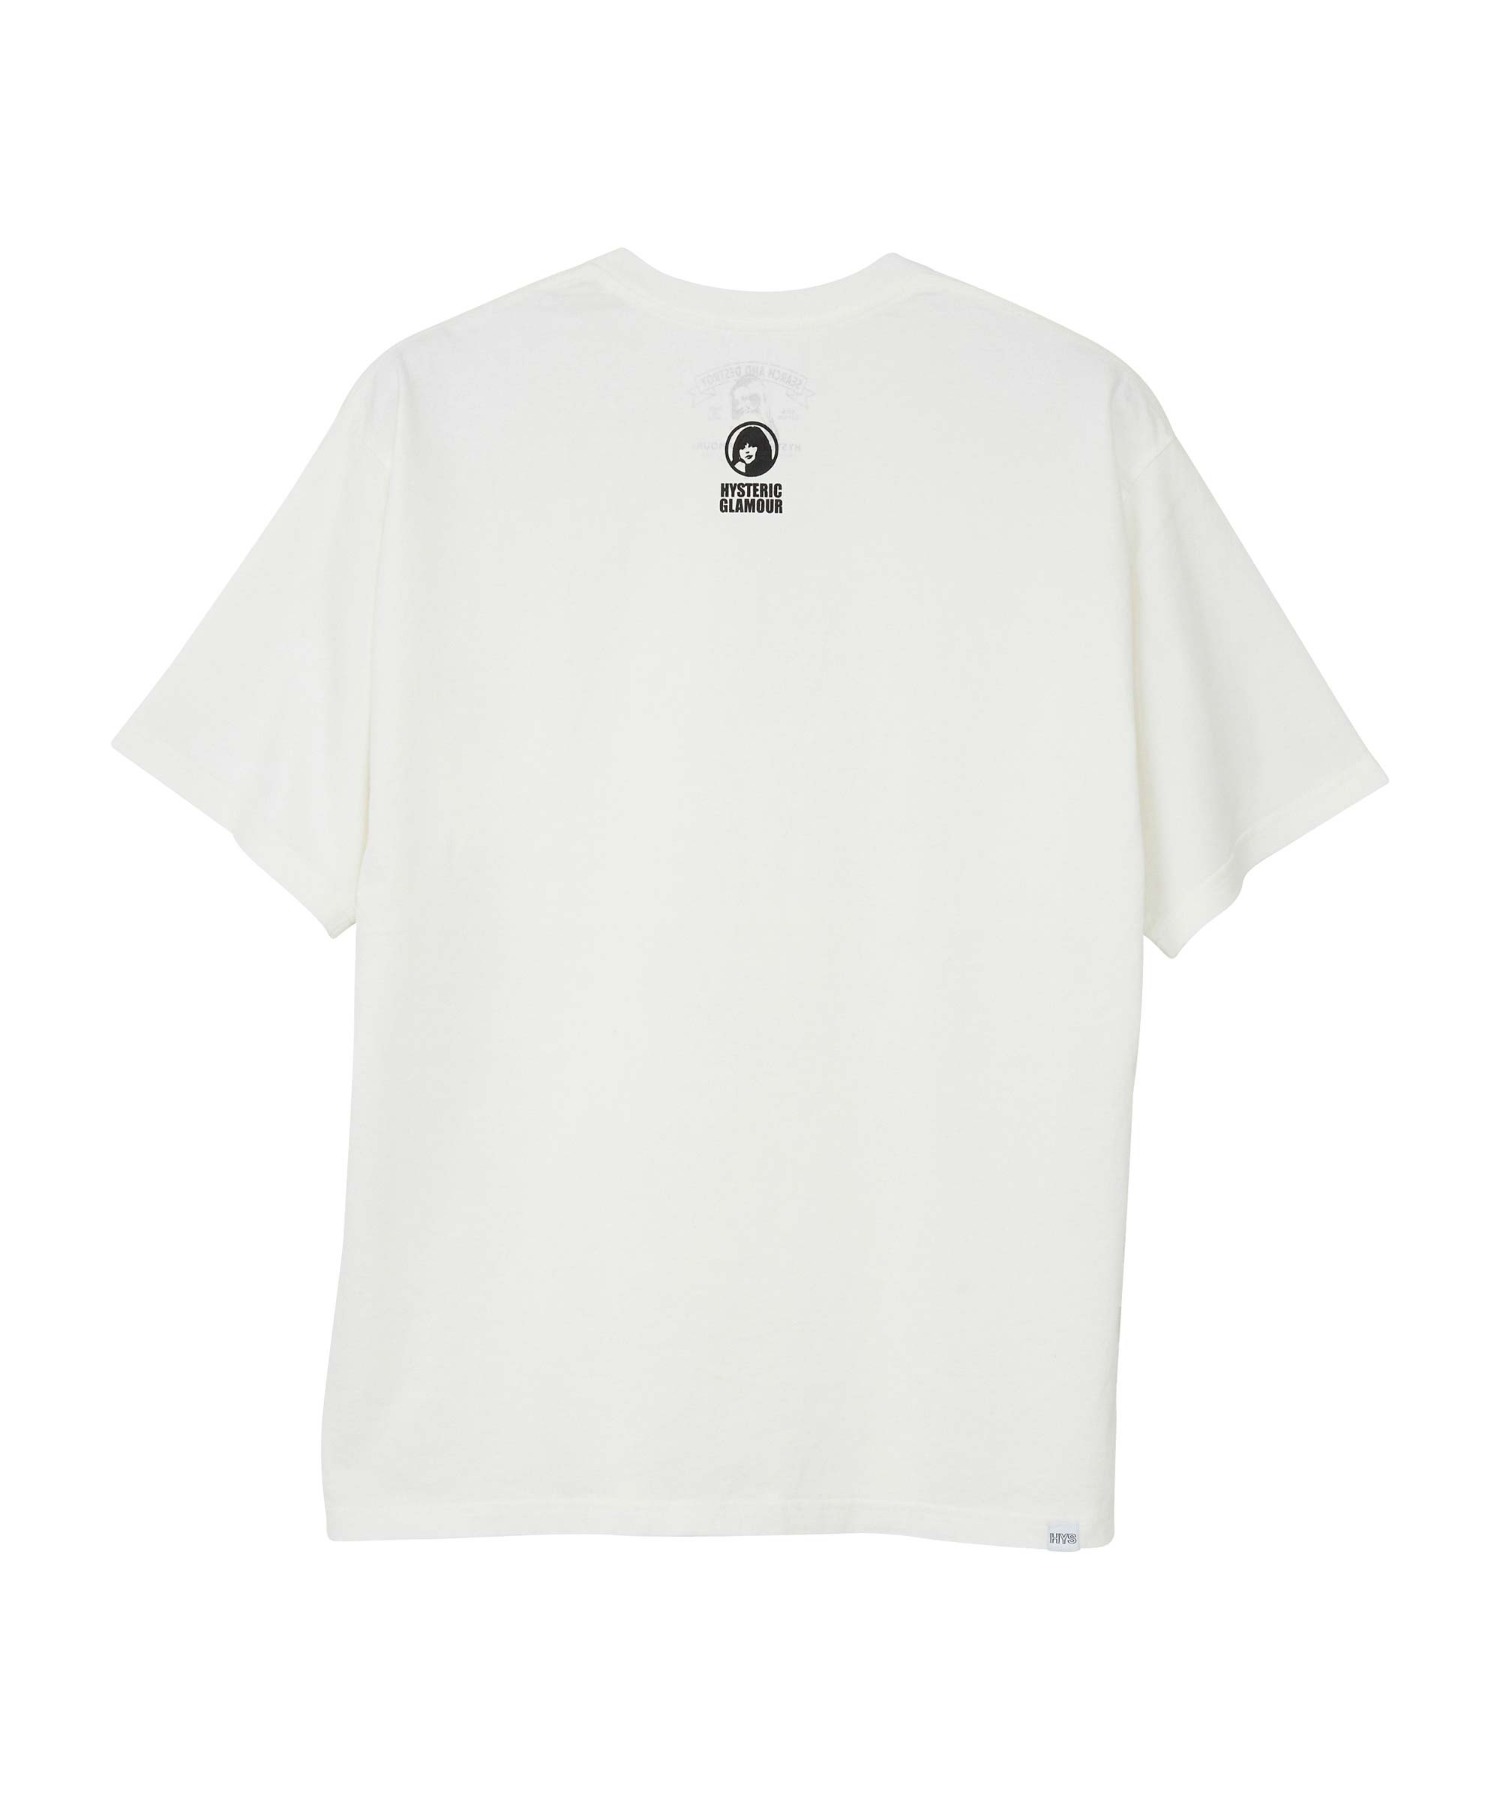 CIRCLE HEAD Tシャツ2PACS HYSTERIC GLAMOUR MEN│HYSTERIC GLAMOUR ONLINE STORE  ヒステリックグラマーオンラインストア